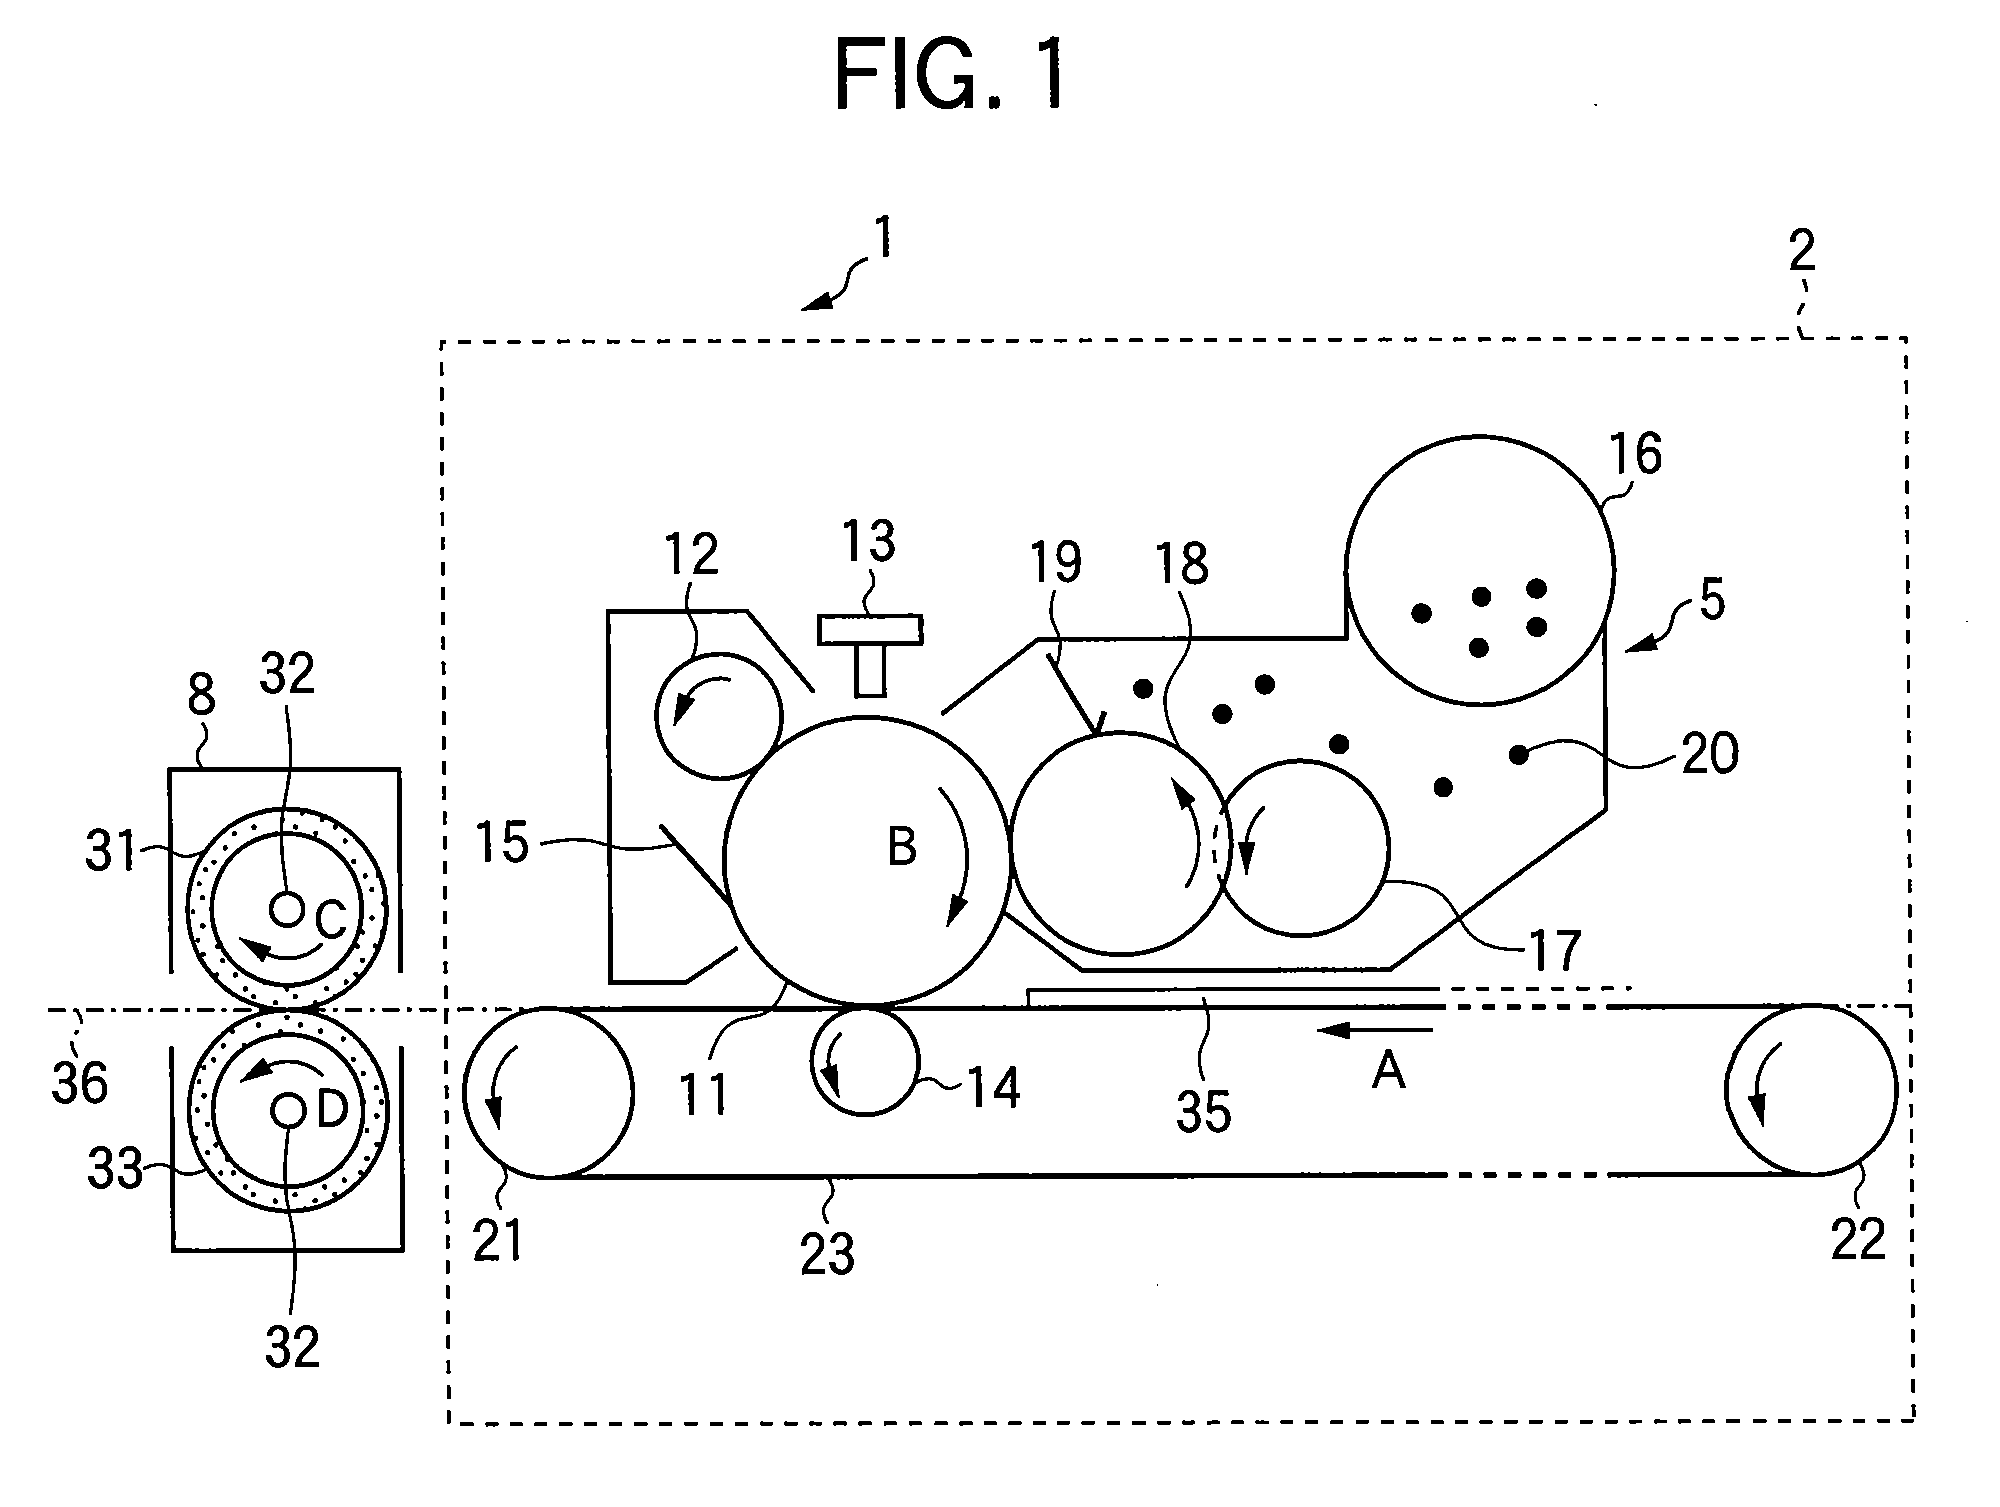 Toner and image forming apparatus that uses the toner